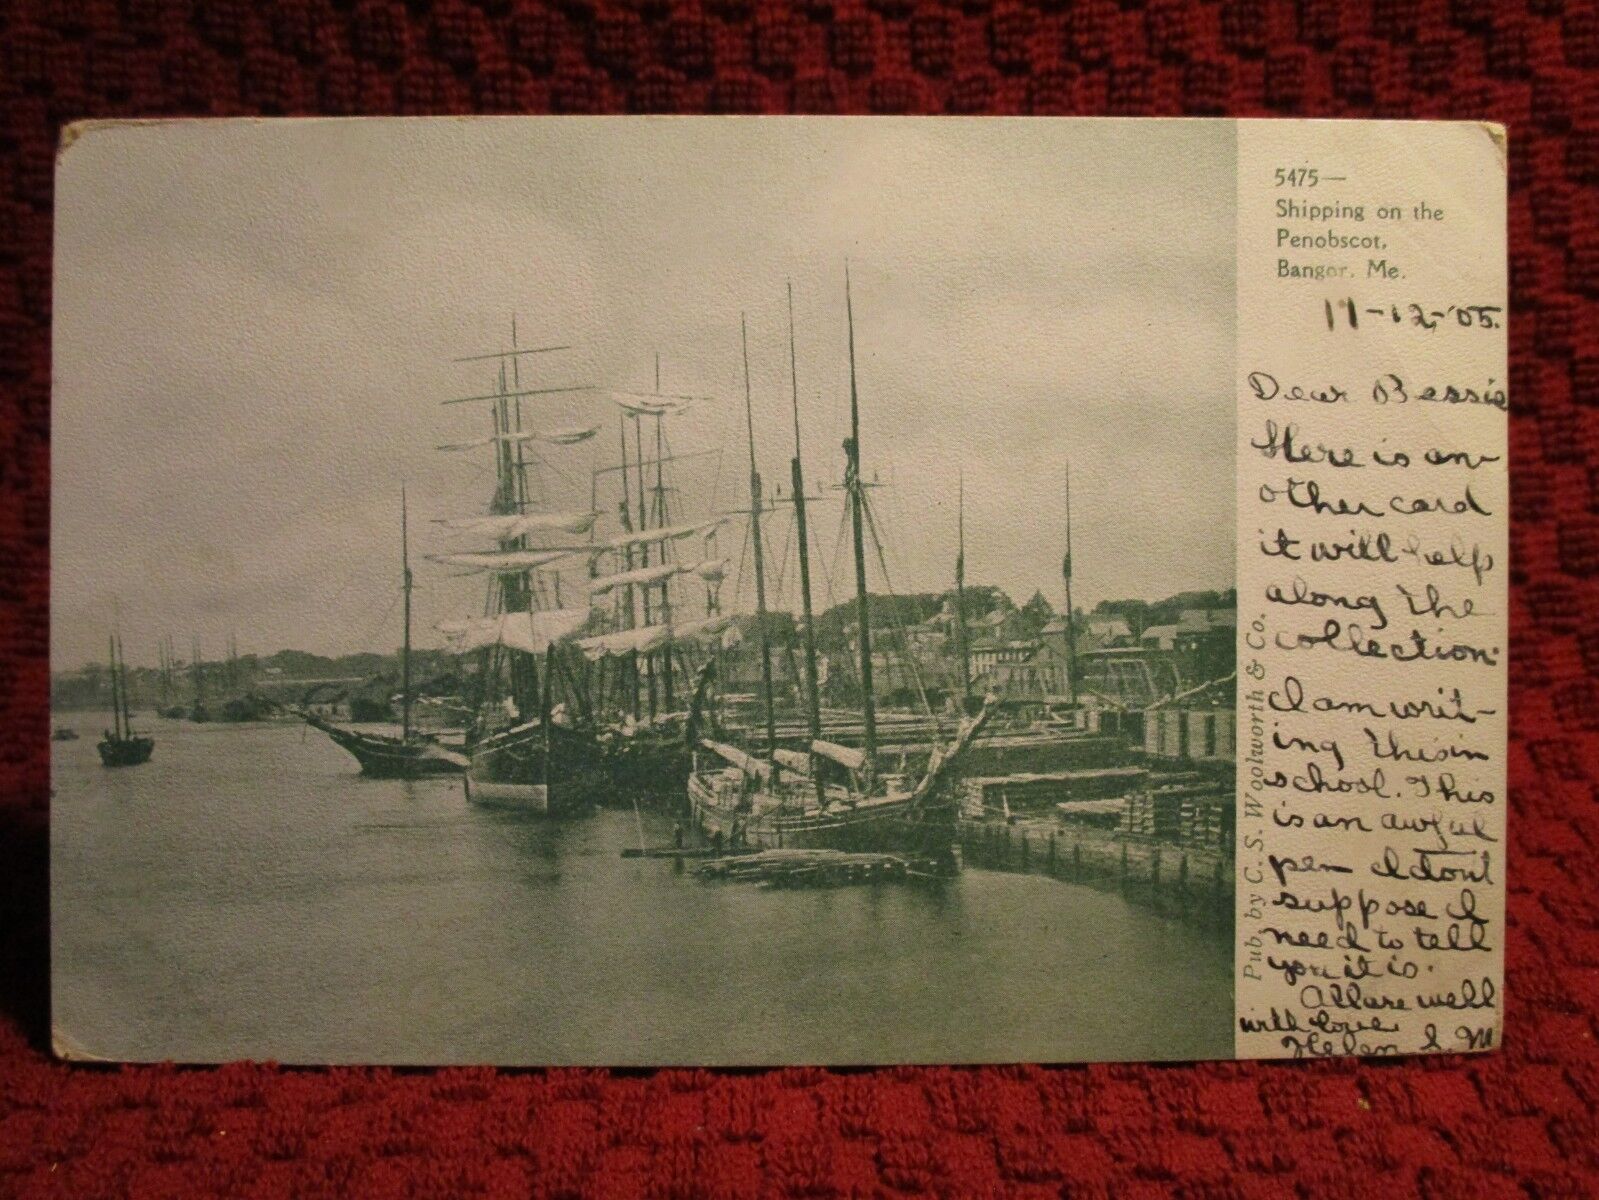 1908. SHIPPING ON THE PENOBSCOT. BANGOR, MAINE. POSTCARD D2